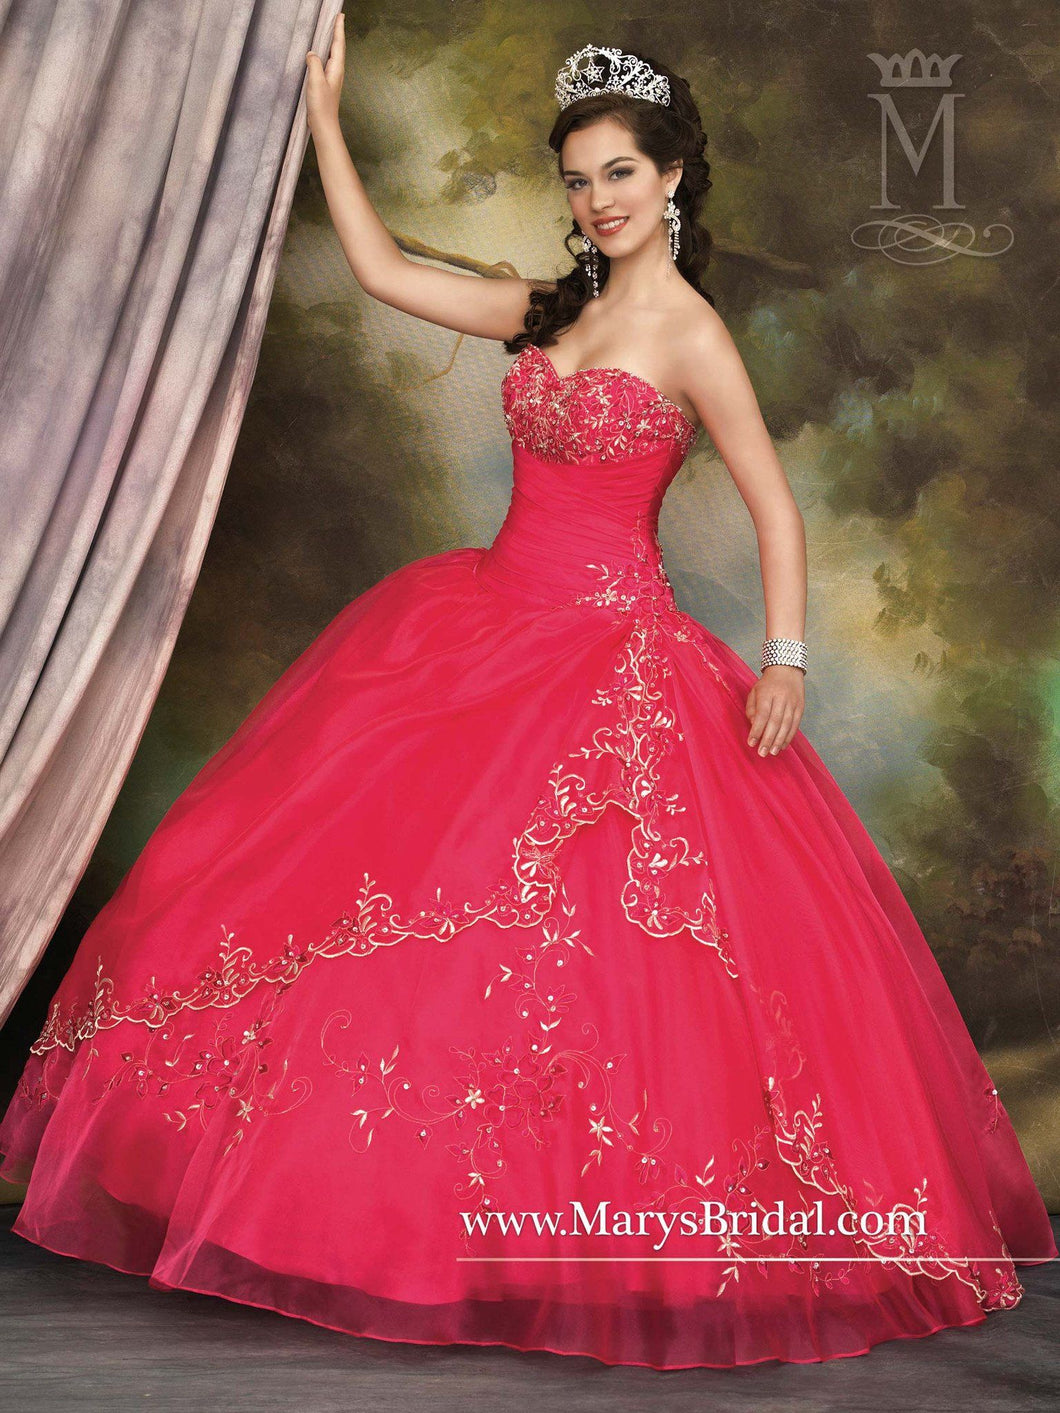 A young lady wearing a strapless princess ballgown in the color azalea/multi 